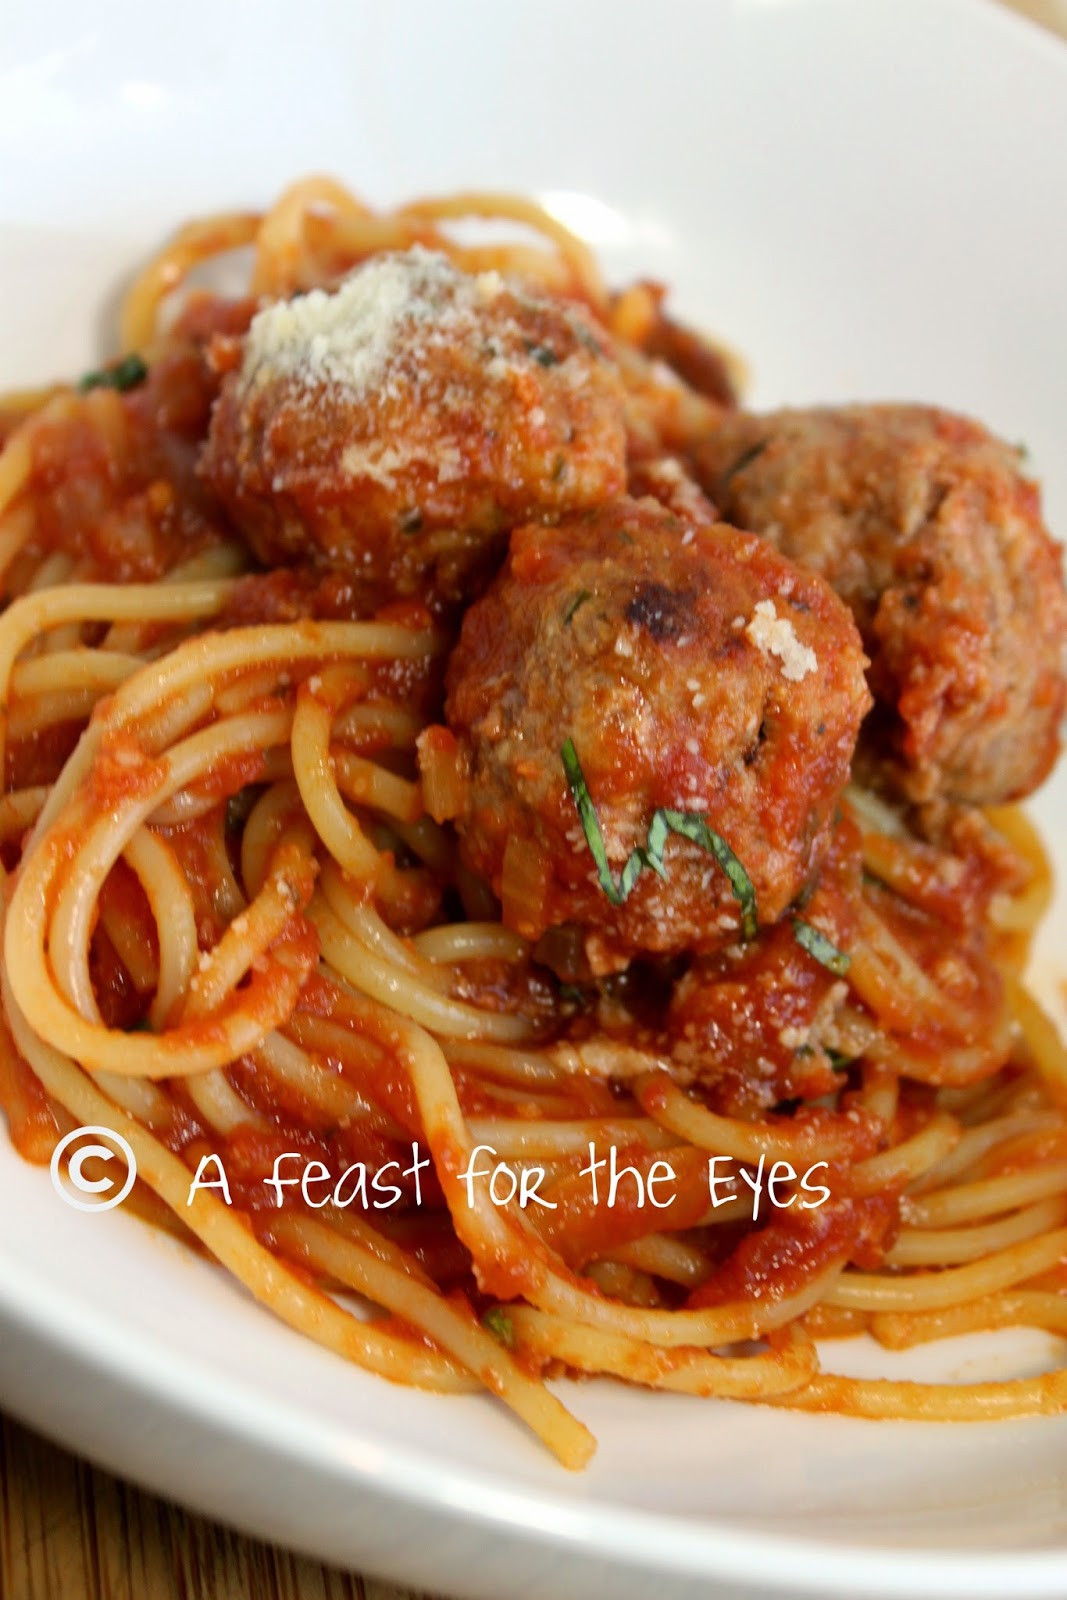 Pressure Cooker Spaghetti And Meatballs Recipe
 A Feast for the Eyes Meatballs and Marinara Pressure